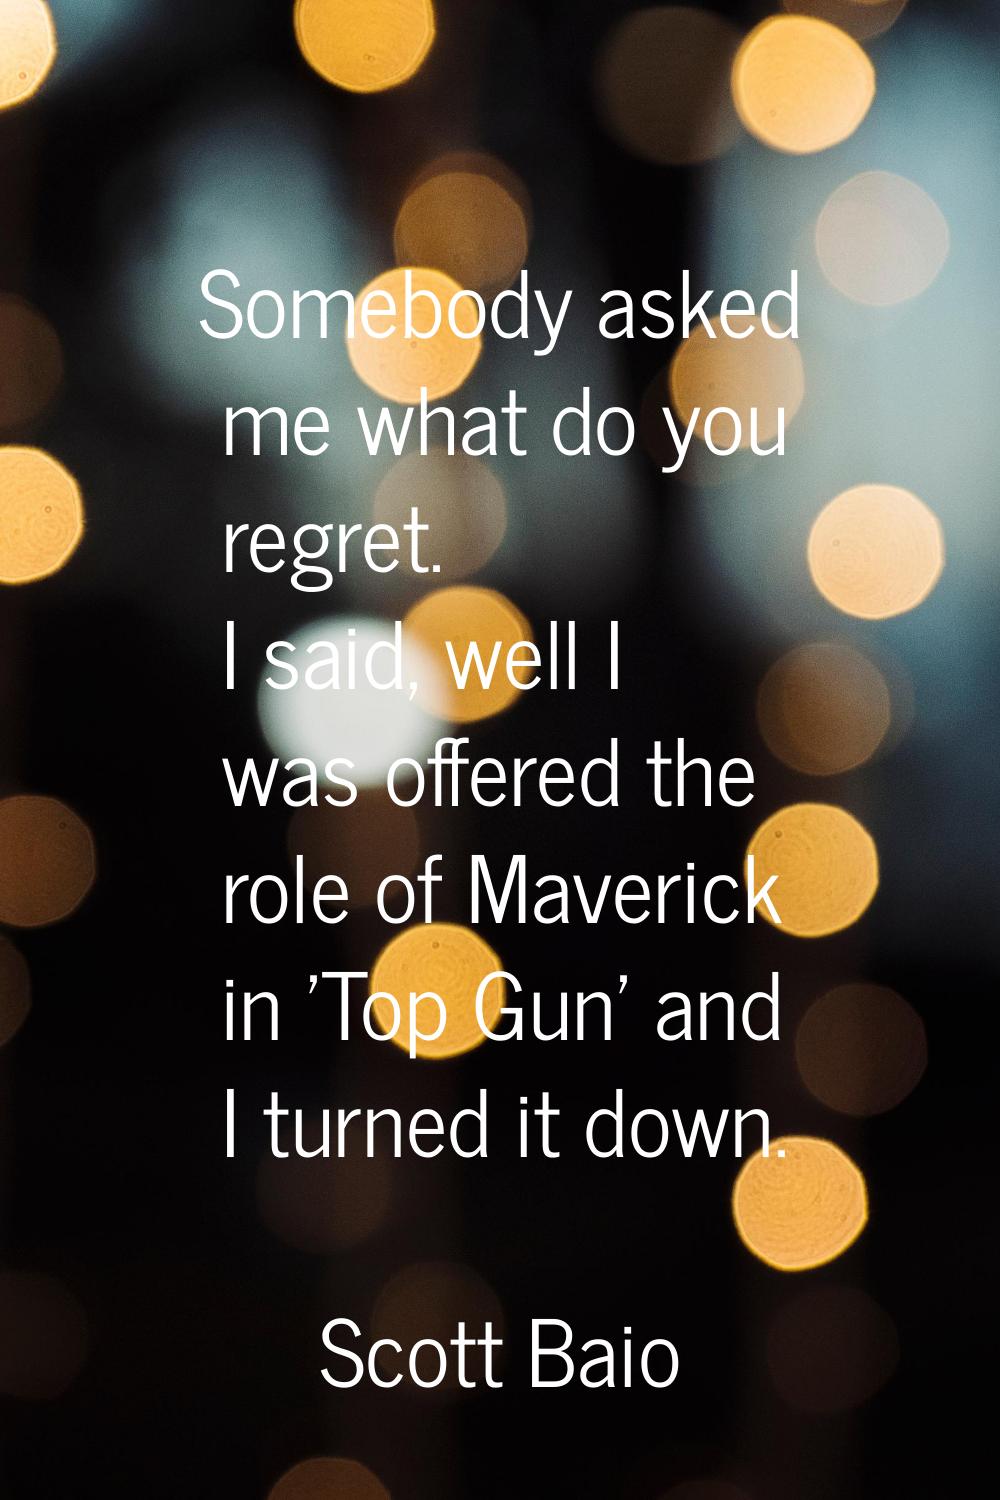 Somebody asked me what do you regret. I said, well I was offered the role of Maverick in 'Top Gun' 